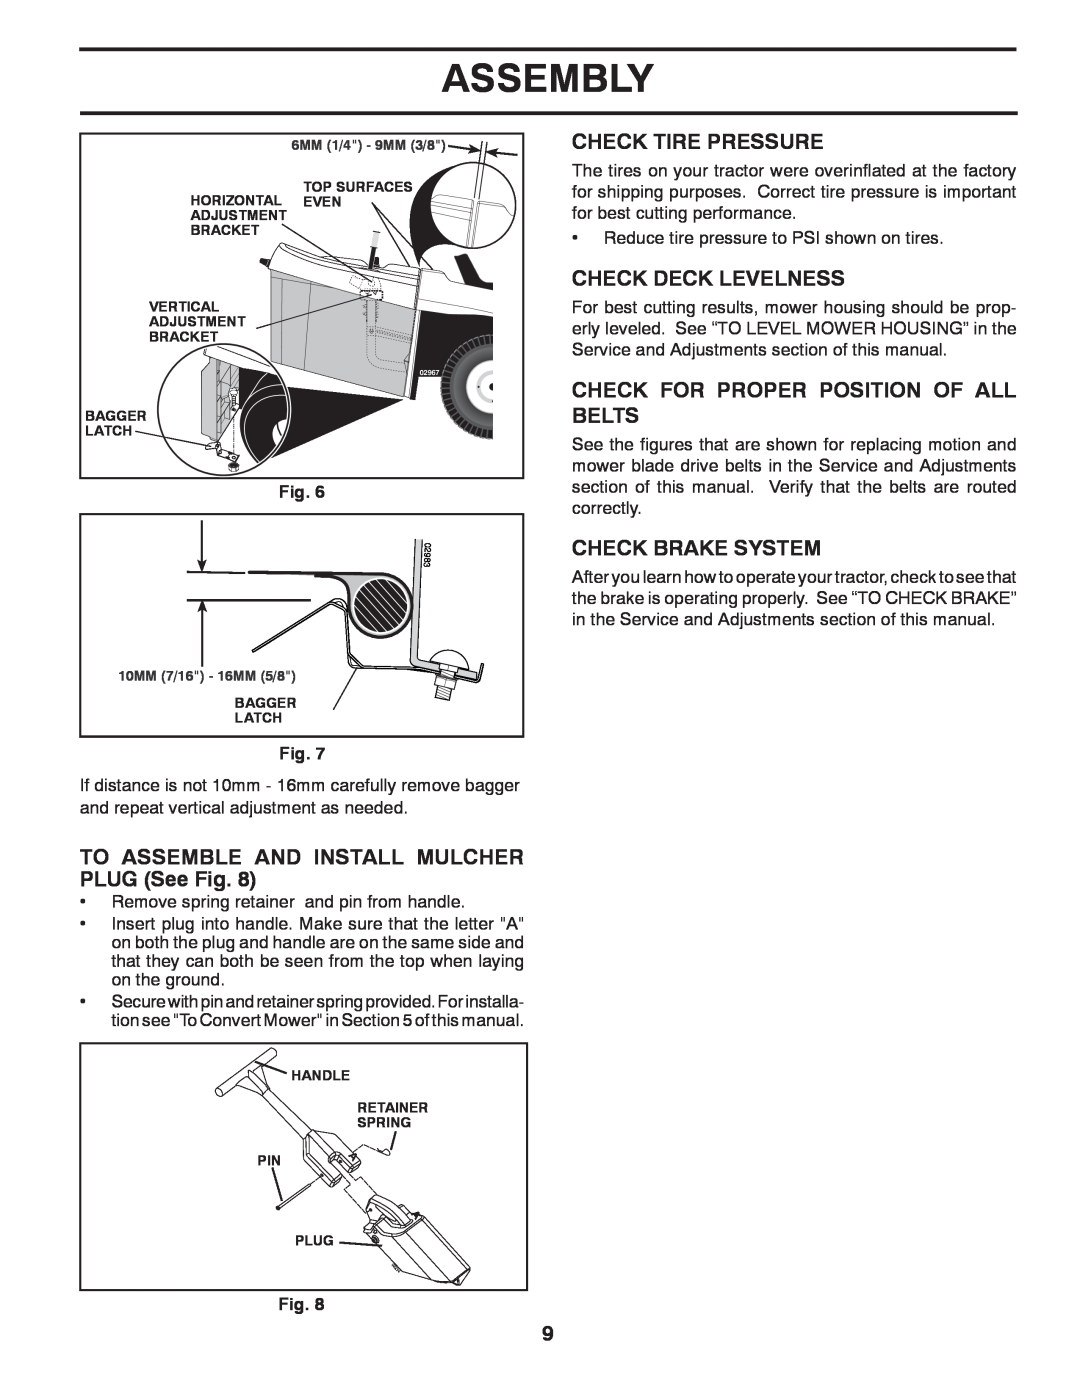 Husqvarna CTH2542T manual TO ASSEMBLE AND INSTALL MULCHER PLUG See Fig, Check Tire Pressure, Check Deck Levelness, Assembly 